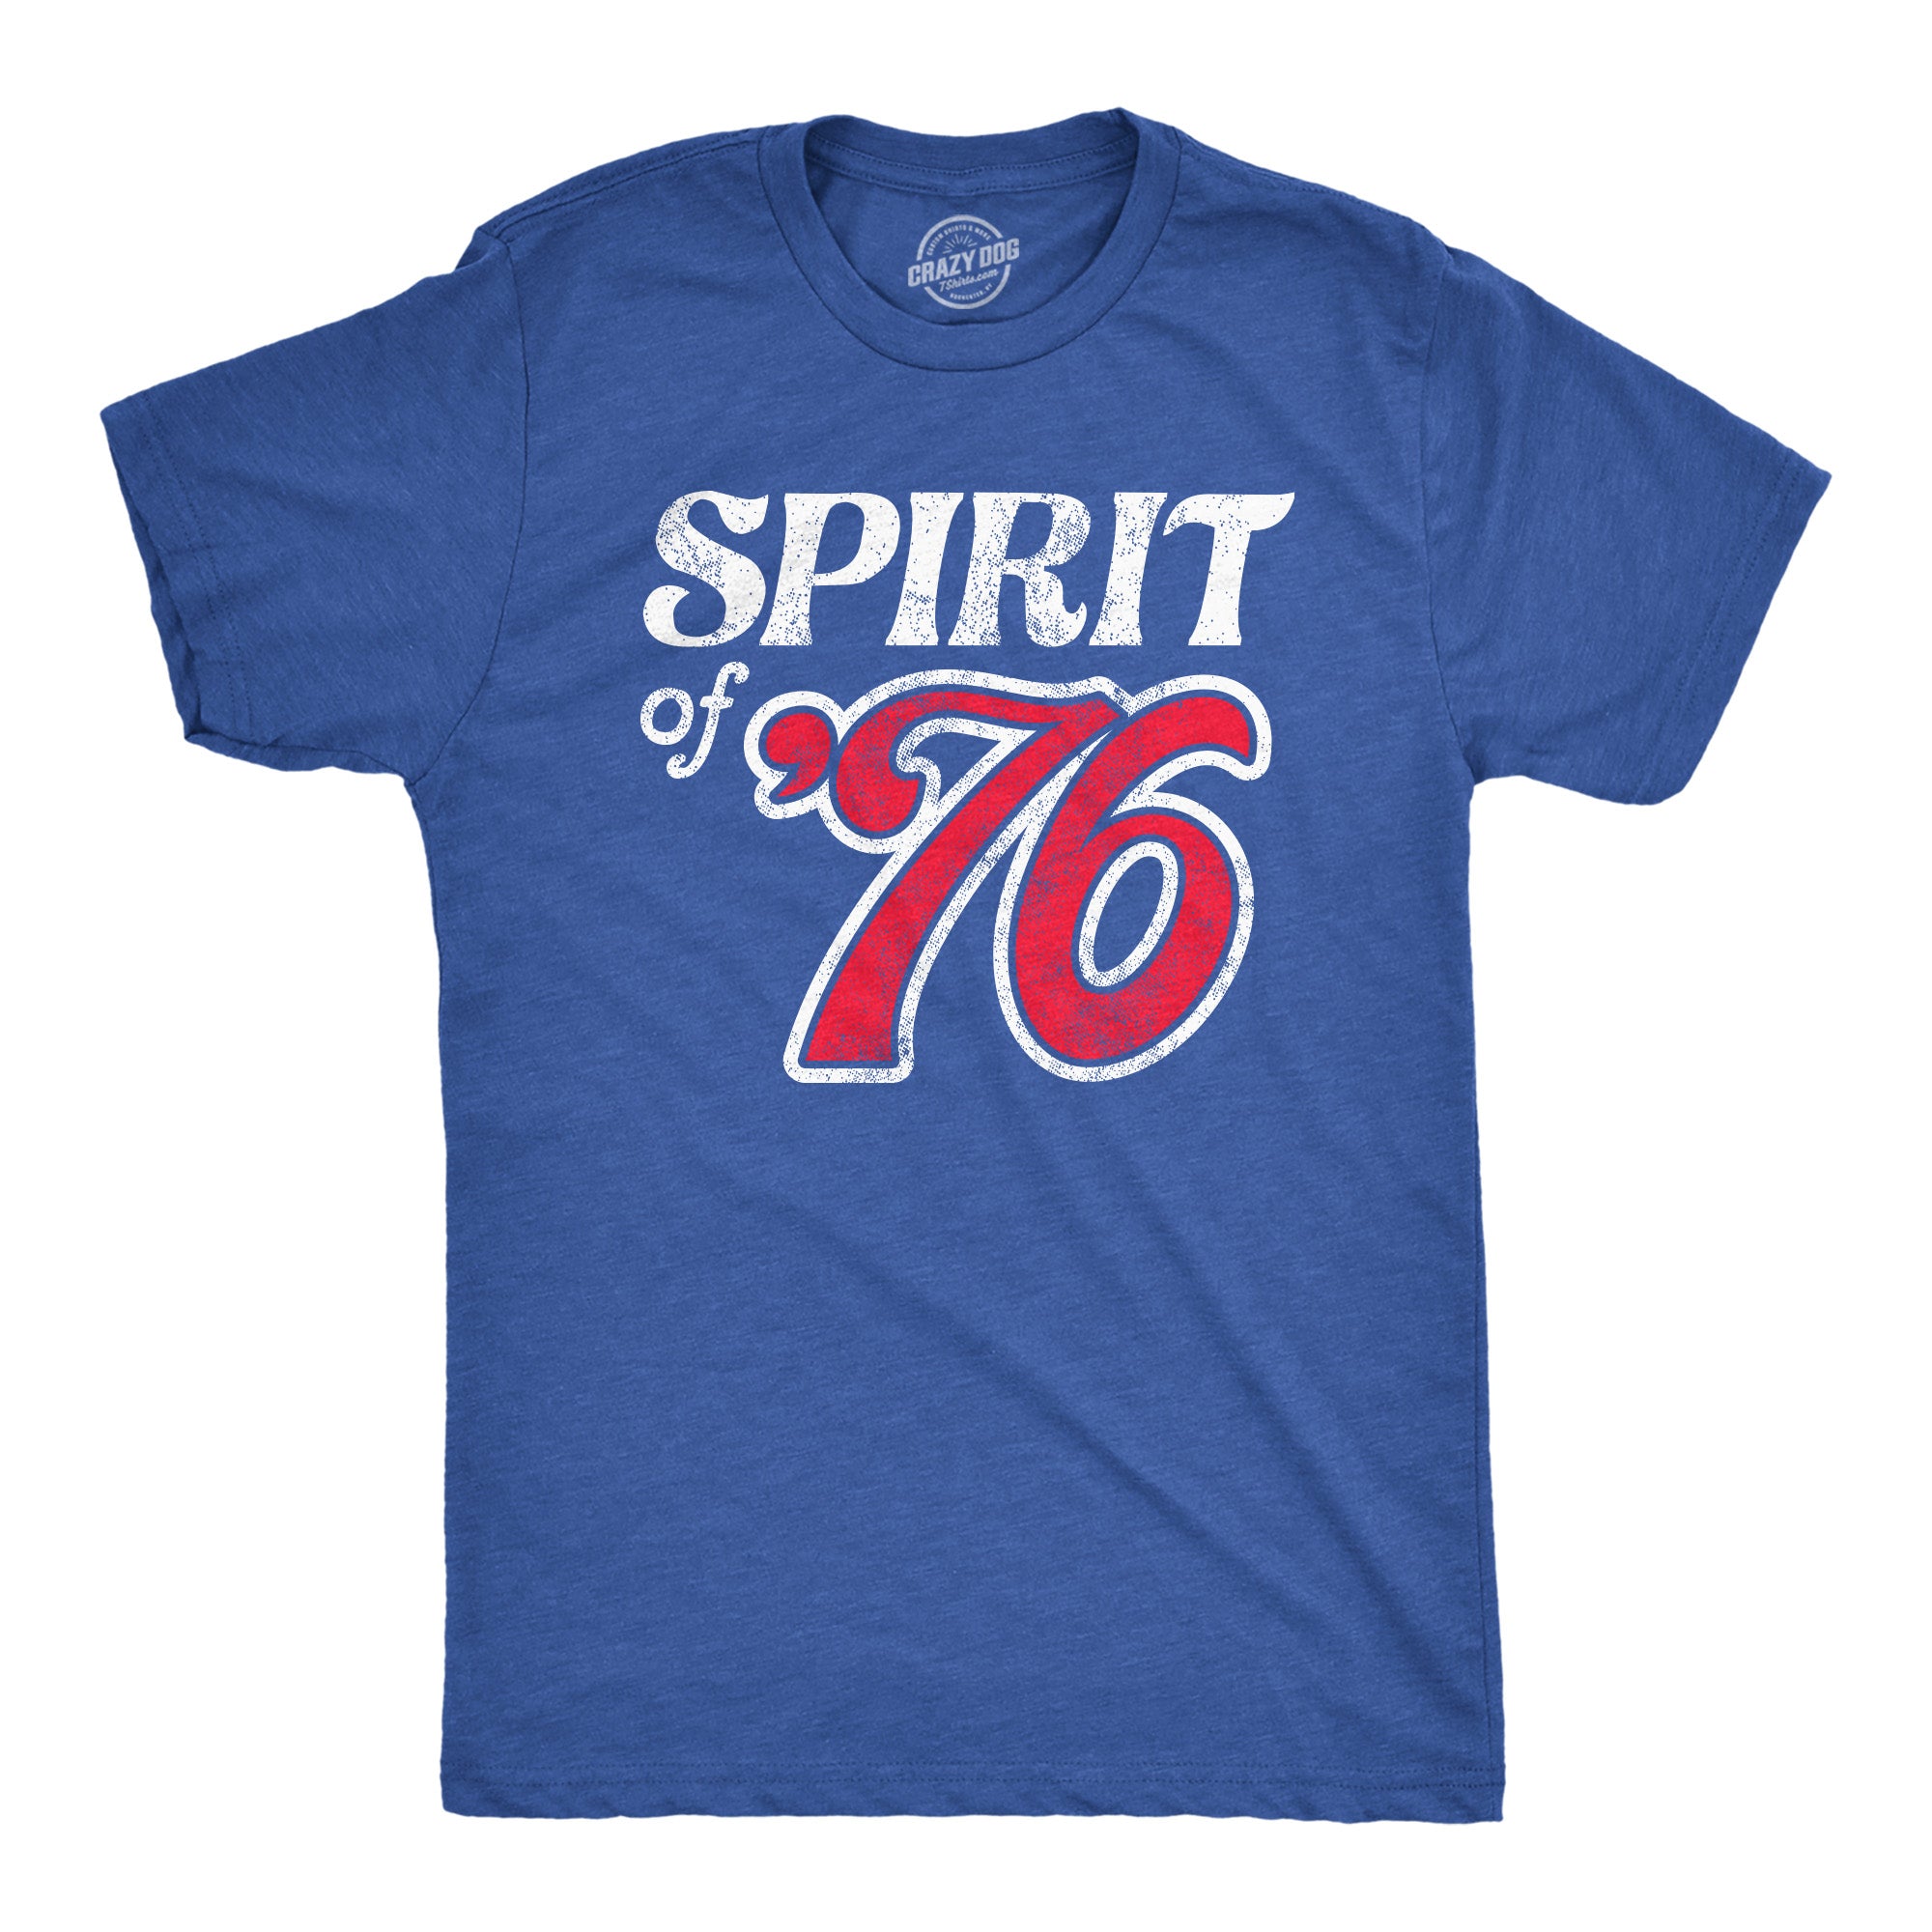 Funny Heather Royal - 76 Spirit Of 76 Mens T Shirt Nerdy Fourth Of July Tee